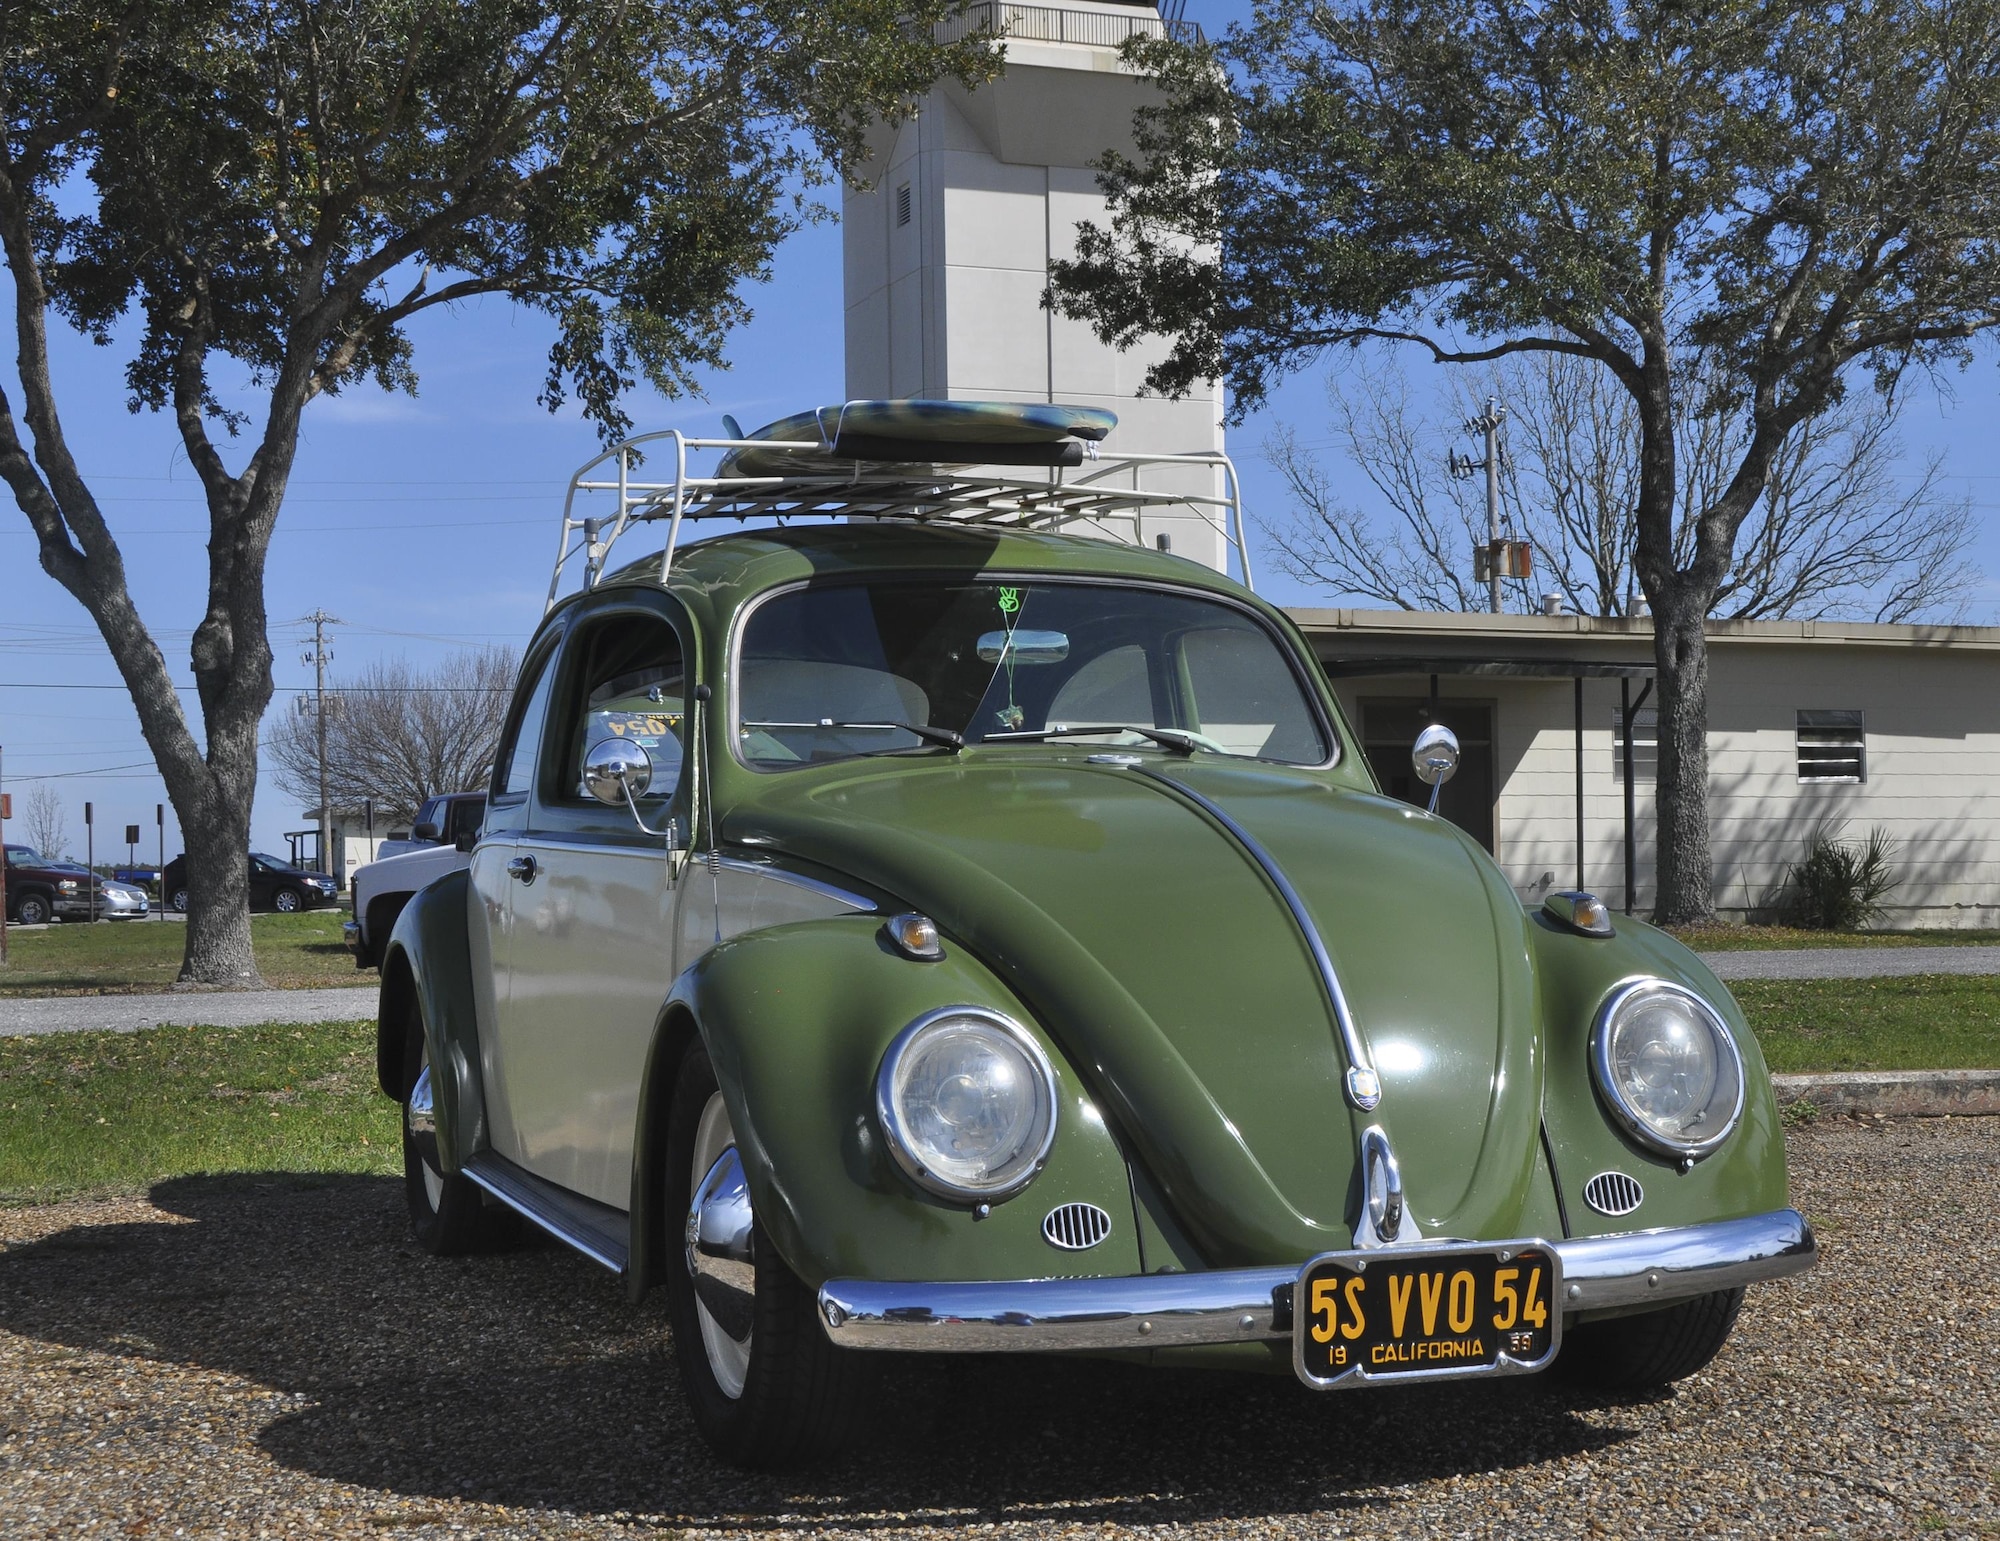 A 1959 Volkswagen was just one of the vehicles on display at the car show portion of the 919th Special Operations Wing’s annual Wing Day March 4 at Duke Field, Fla.  The wing sets aside a special day each year to show appreciation for its reservists and their family members. Events included music, food, children’s games, etc. (U.S. Air Force photo/Dan Neely)